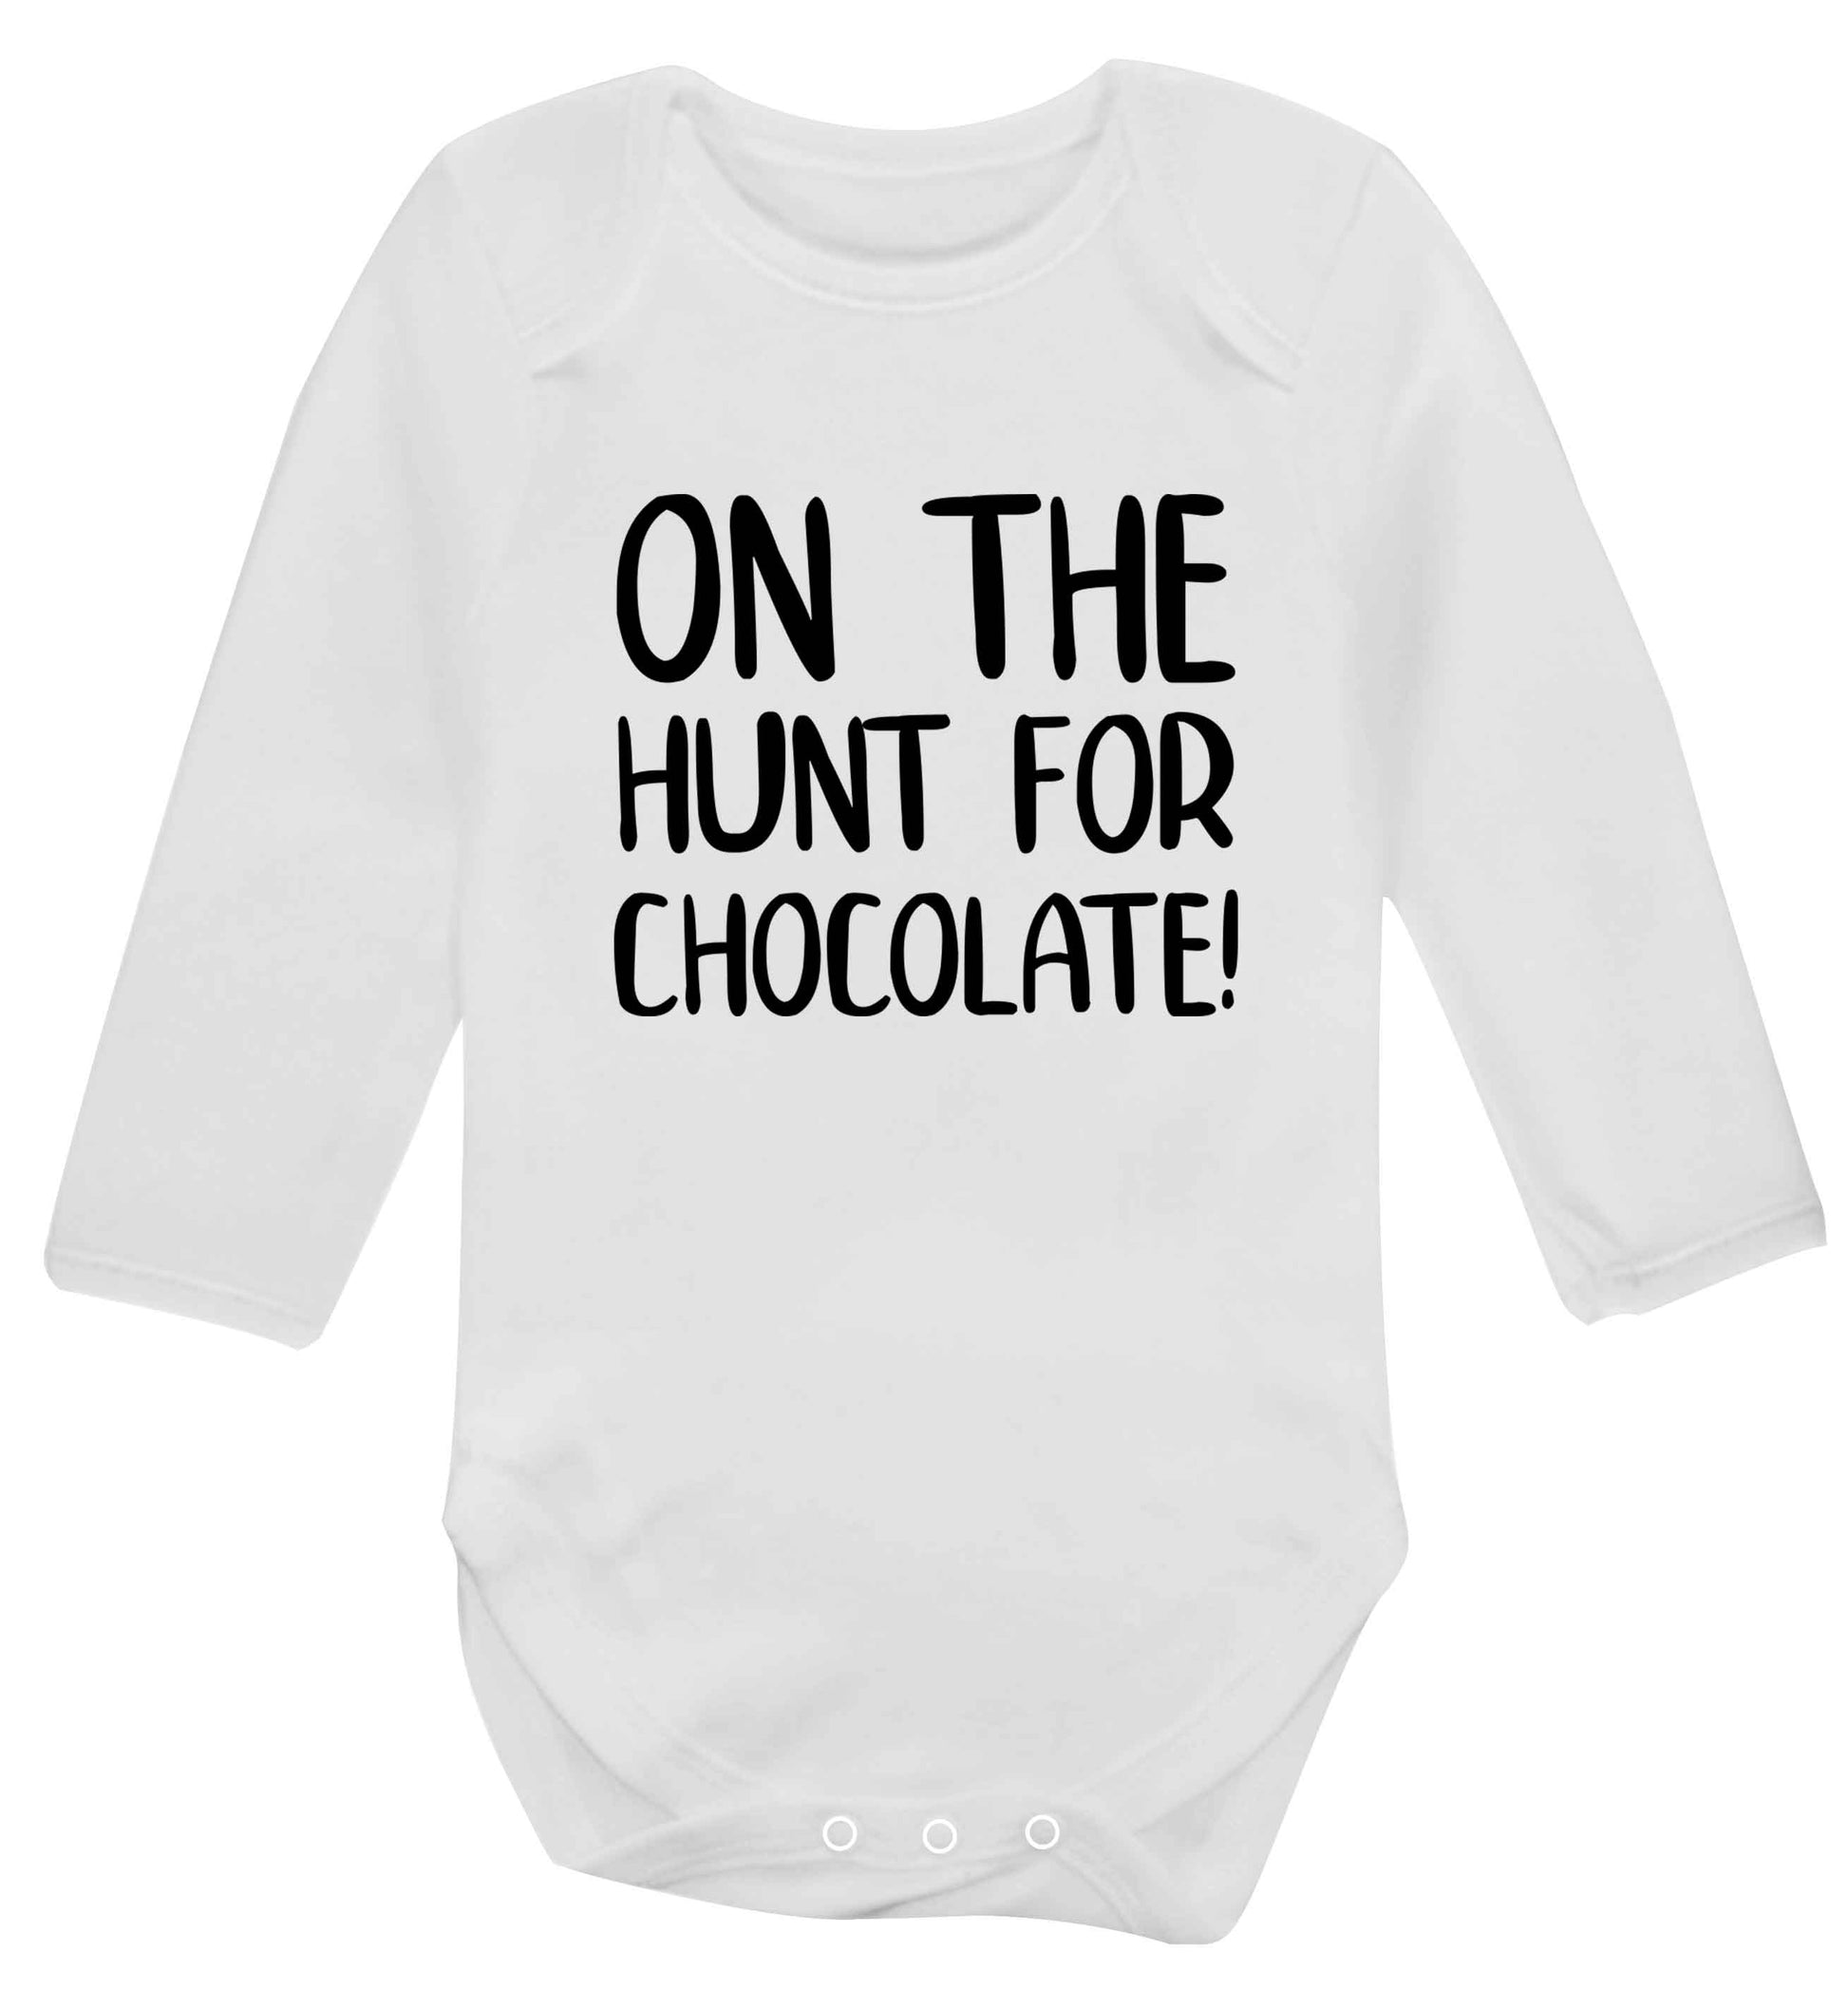 On the hunt for chocolate! baby vest long sleeved white 6-12 months